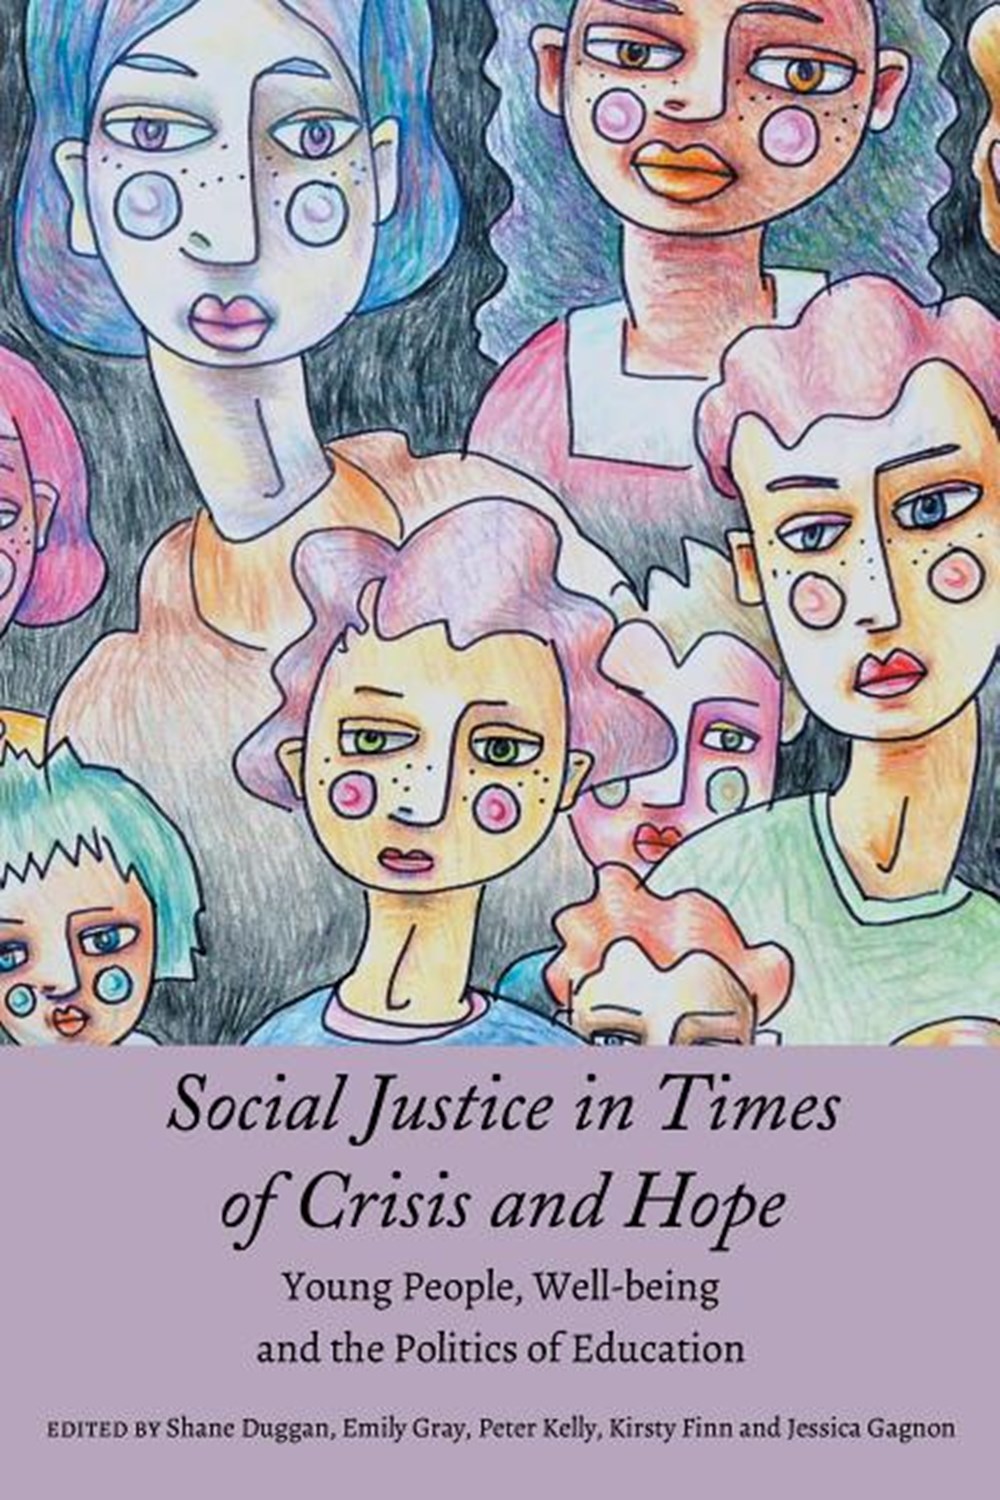 Social Justice in Times of Crisis and Hope: Young People, Well-being and the Politics of Education